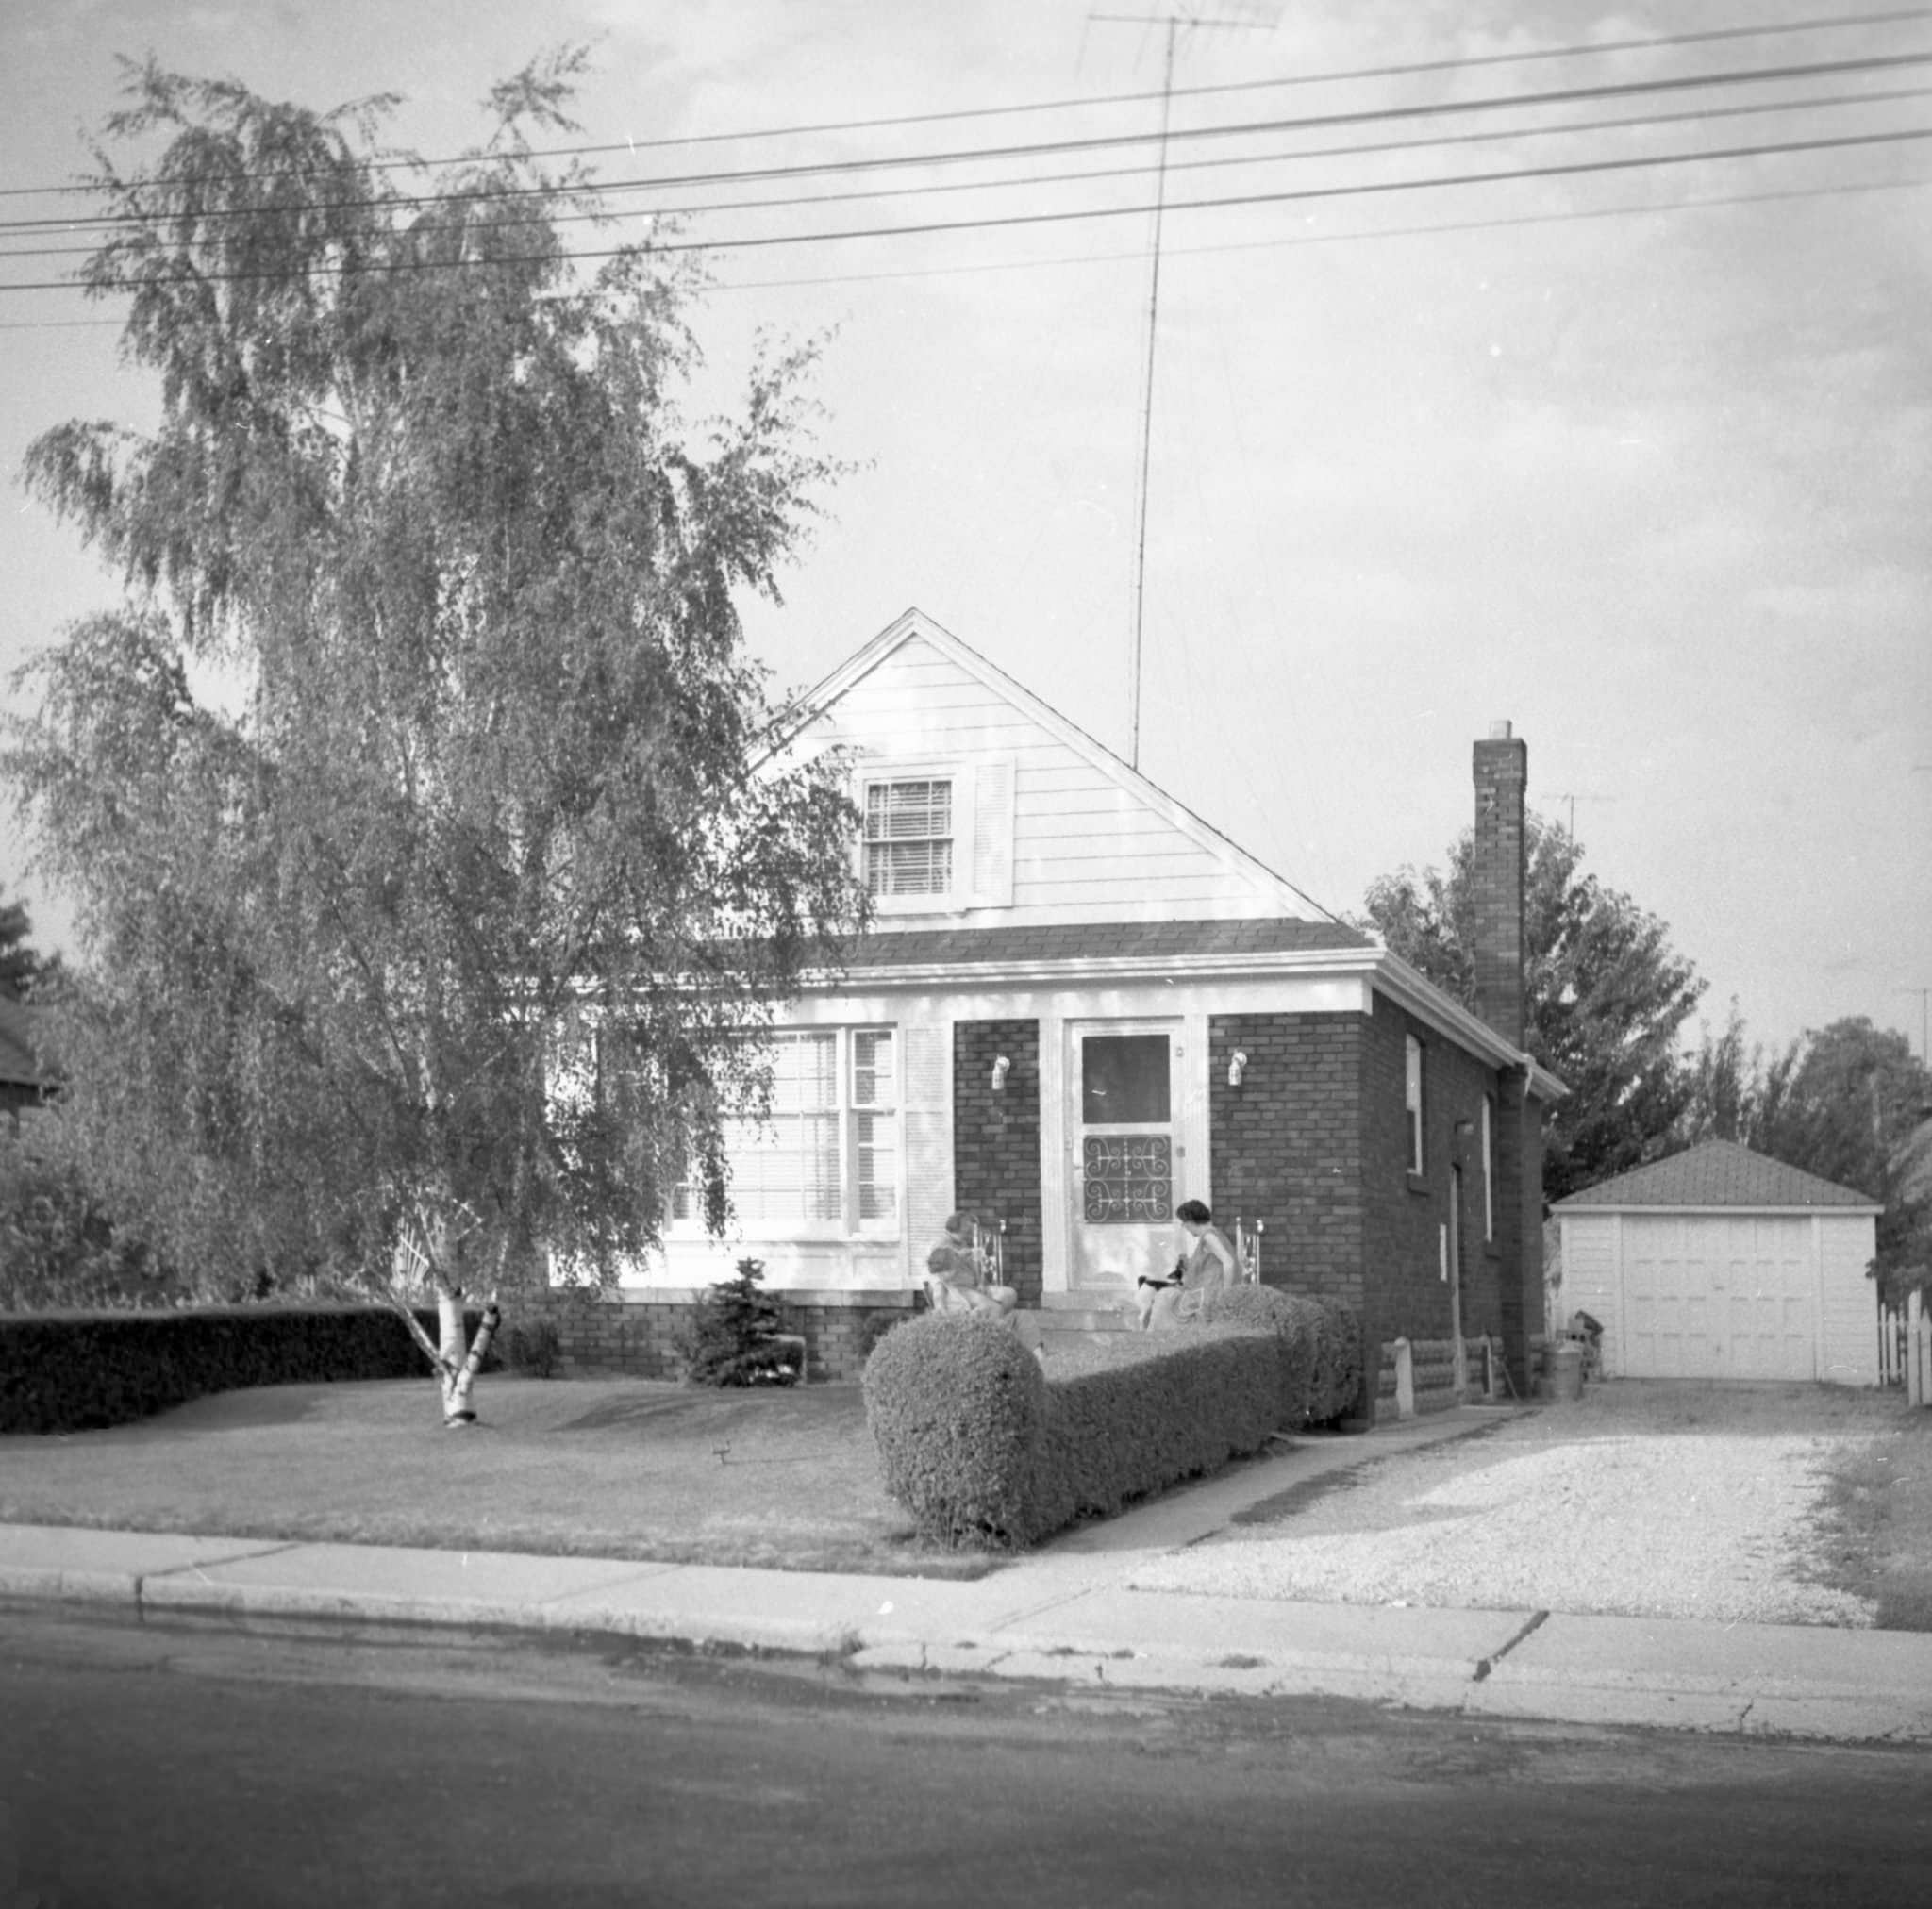 House on Linsmore Cr. in 1956